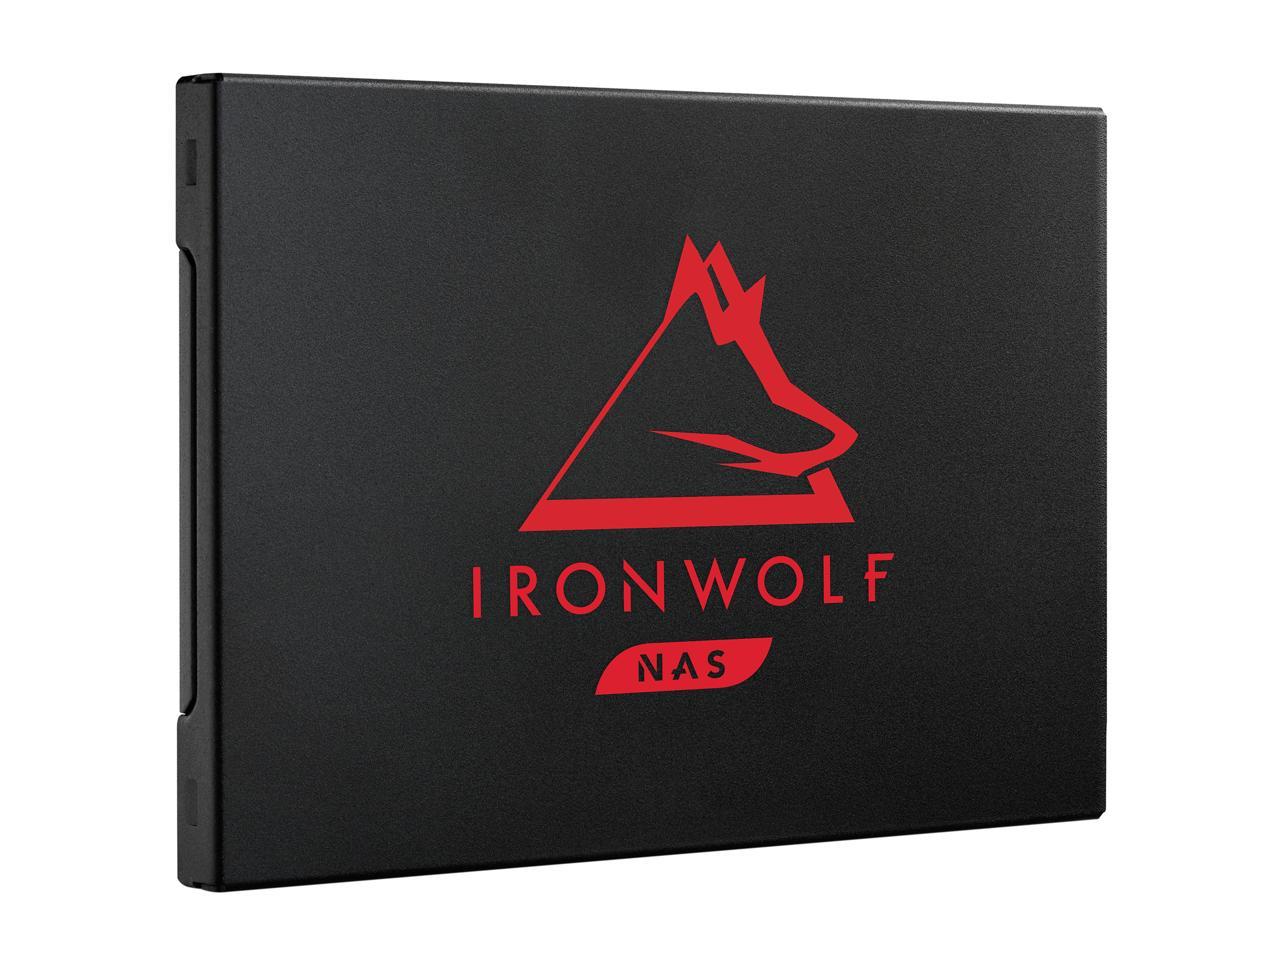 Seagate IronWolf 125 SSD 4TB NAS Internal Solid State Drive - 2.5 Inch SATA 6Gb/s Speeds of up to 560 MB/s, 0.7 DWPD Endurance and 24x7 Performance for Creative Pro and SMB/SME (ZA4000NM1A002)